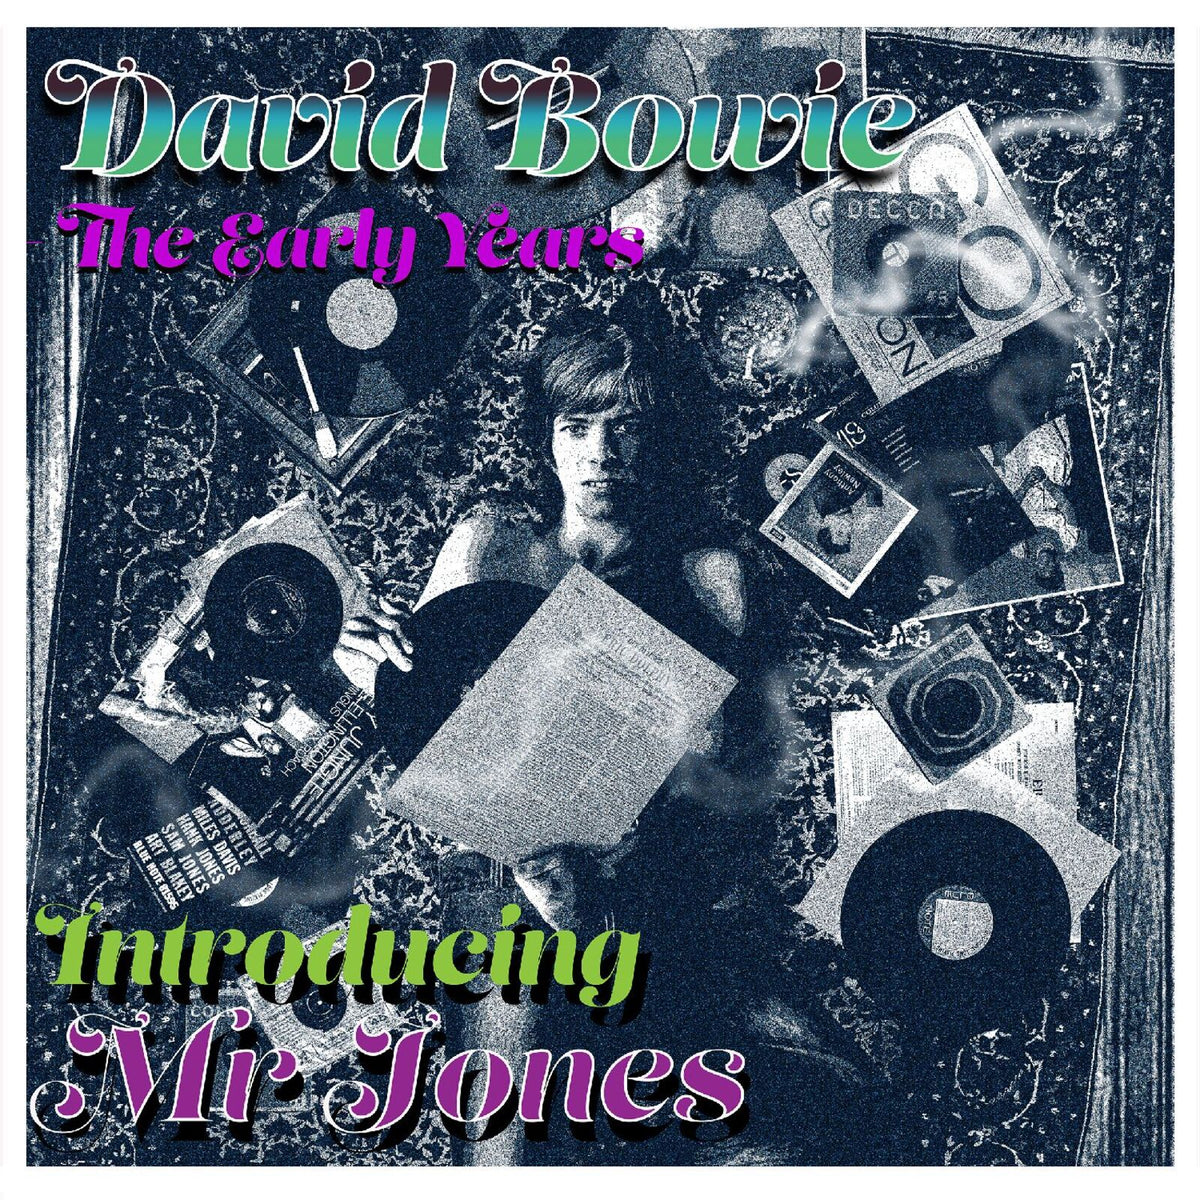 David Bowie - Introducing Mr Jones (The Early Years) - GSGZ464CD